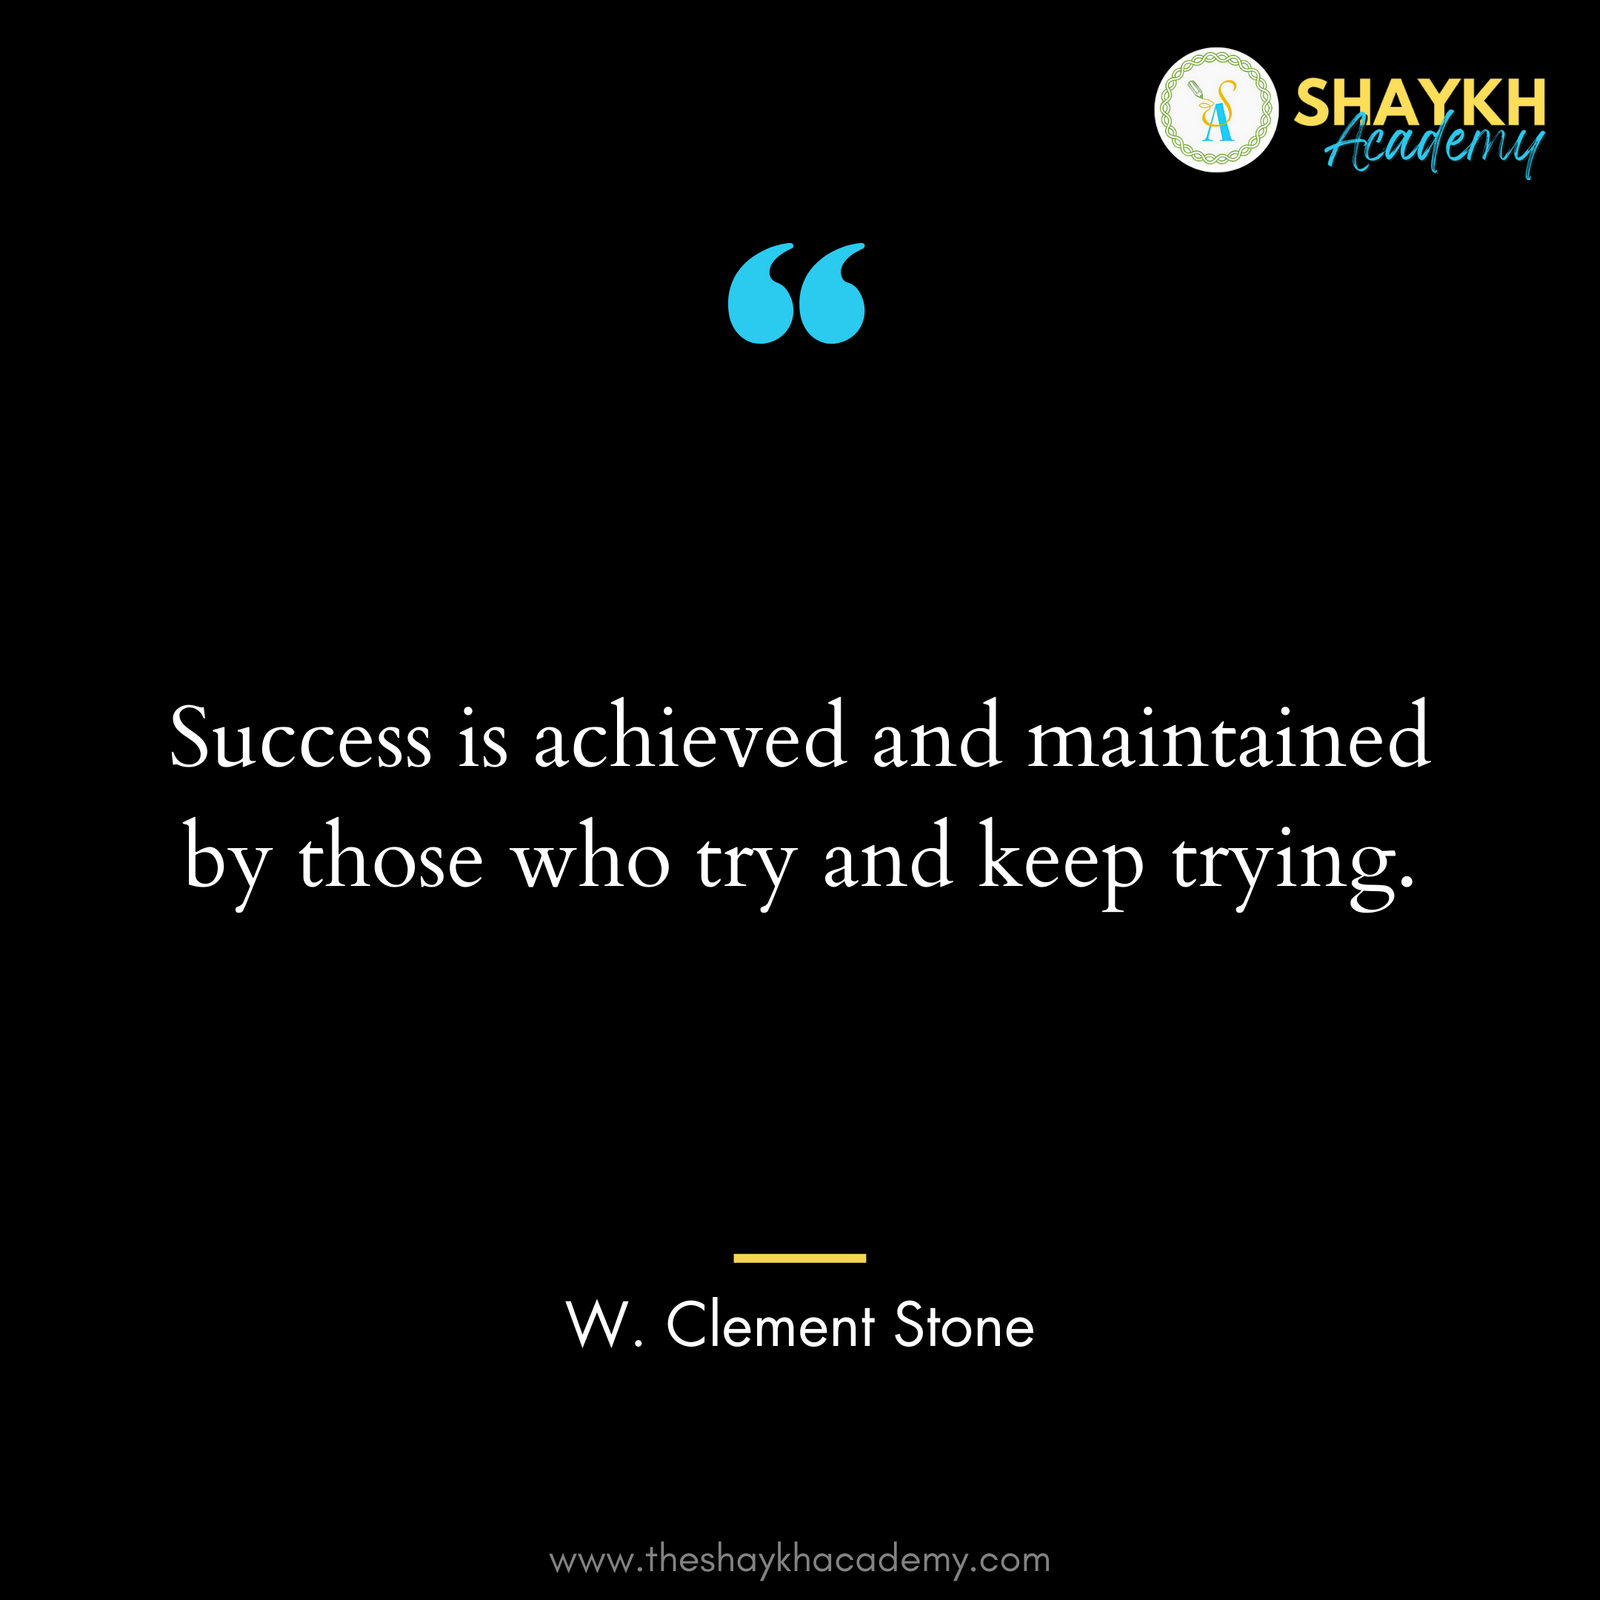 Success is achieved and maintained by those who try and keep trying